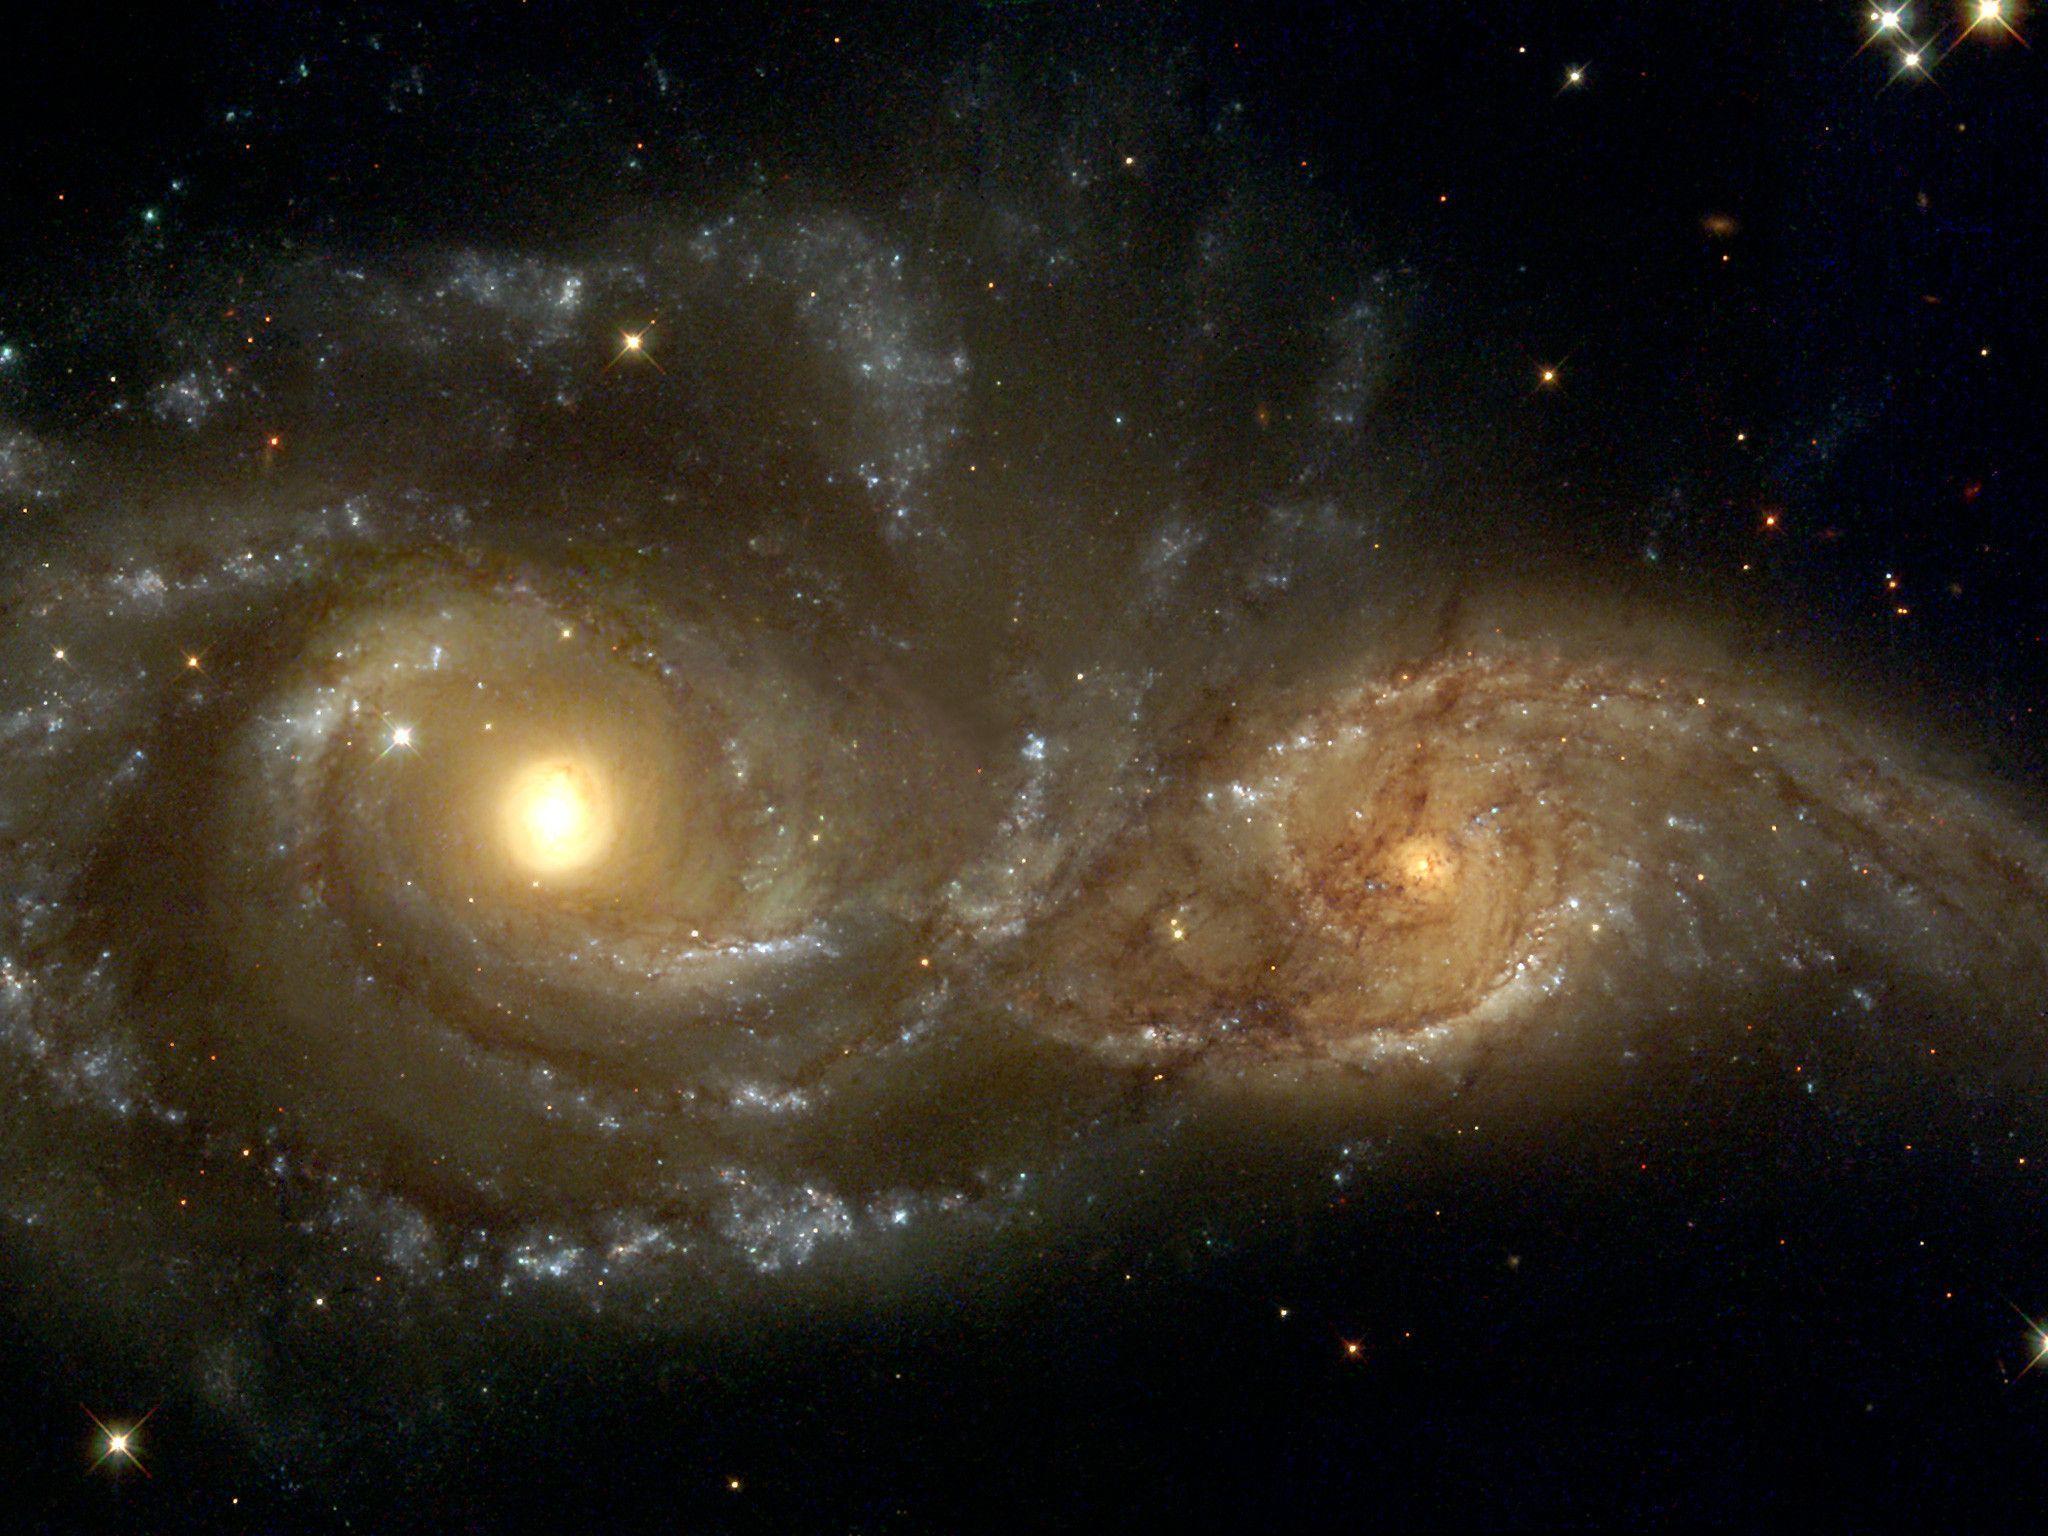 A Grazing Encounter Between two Spiral Galaxies. ESA